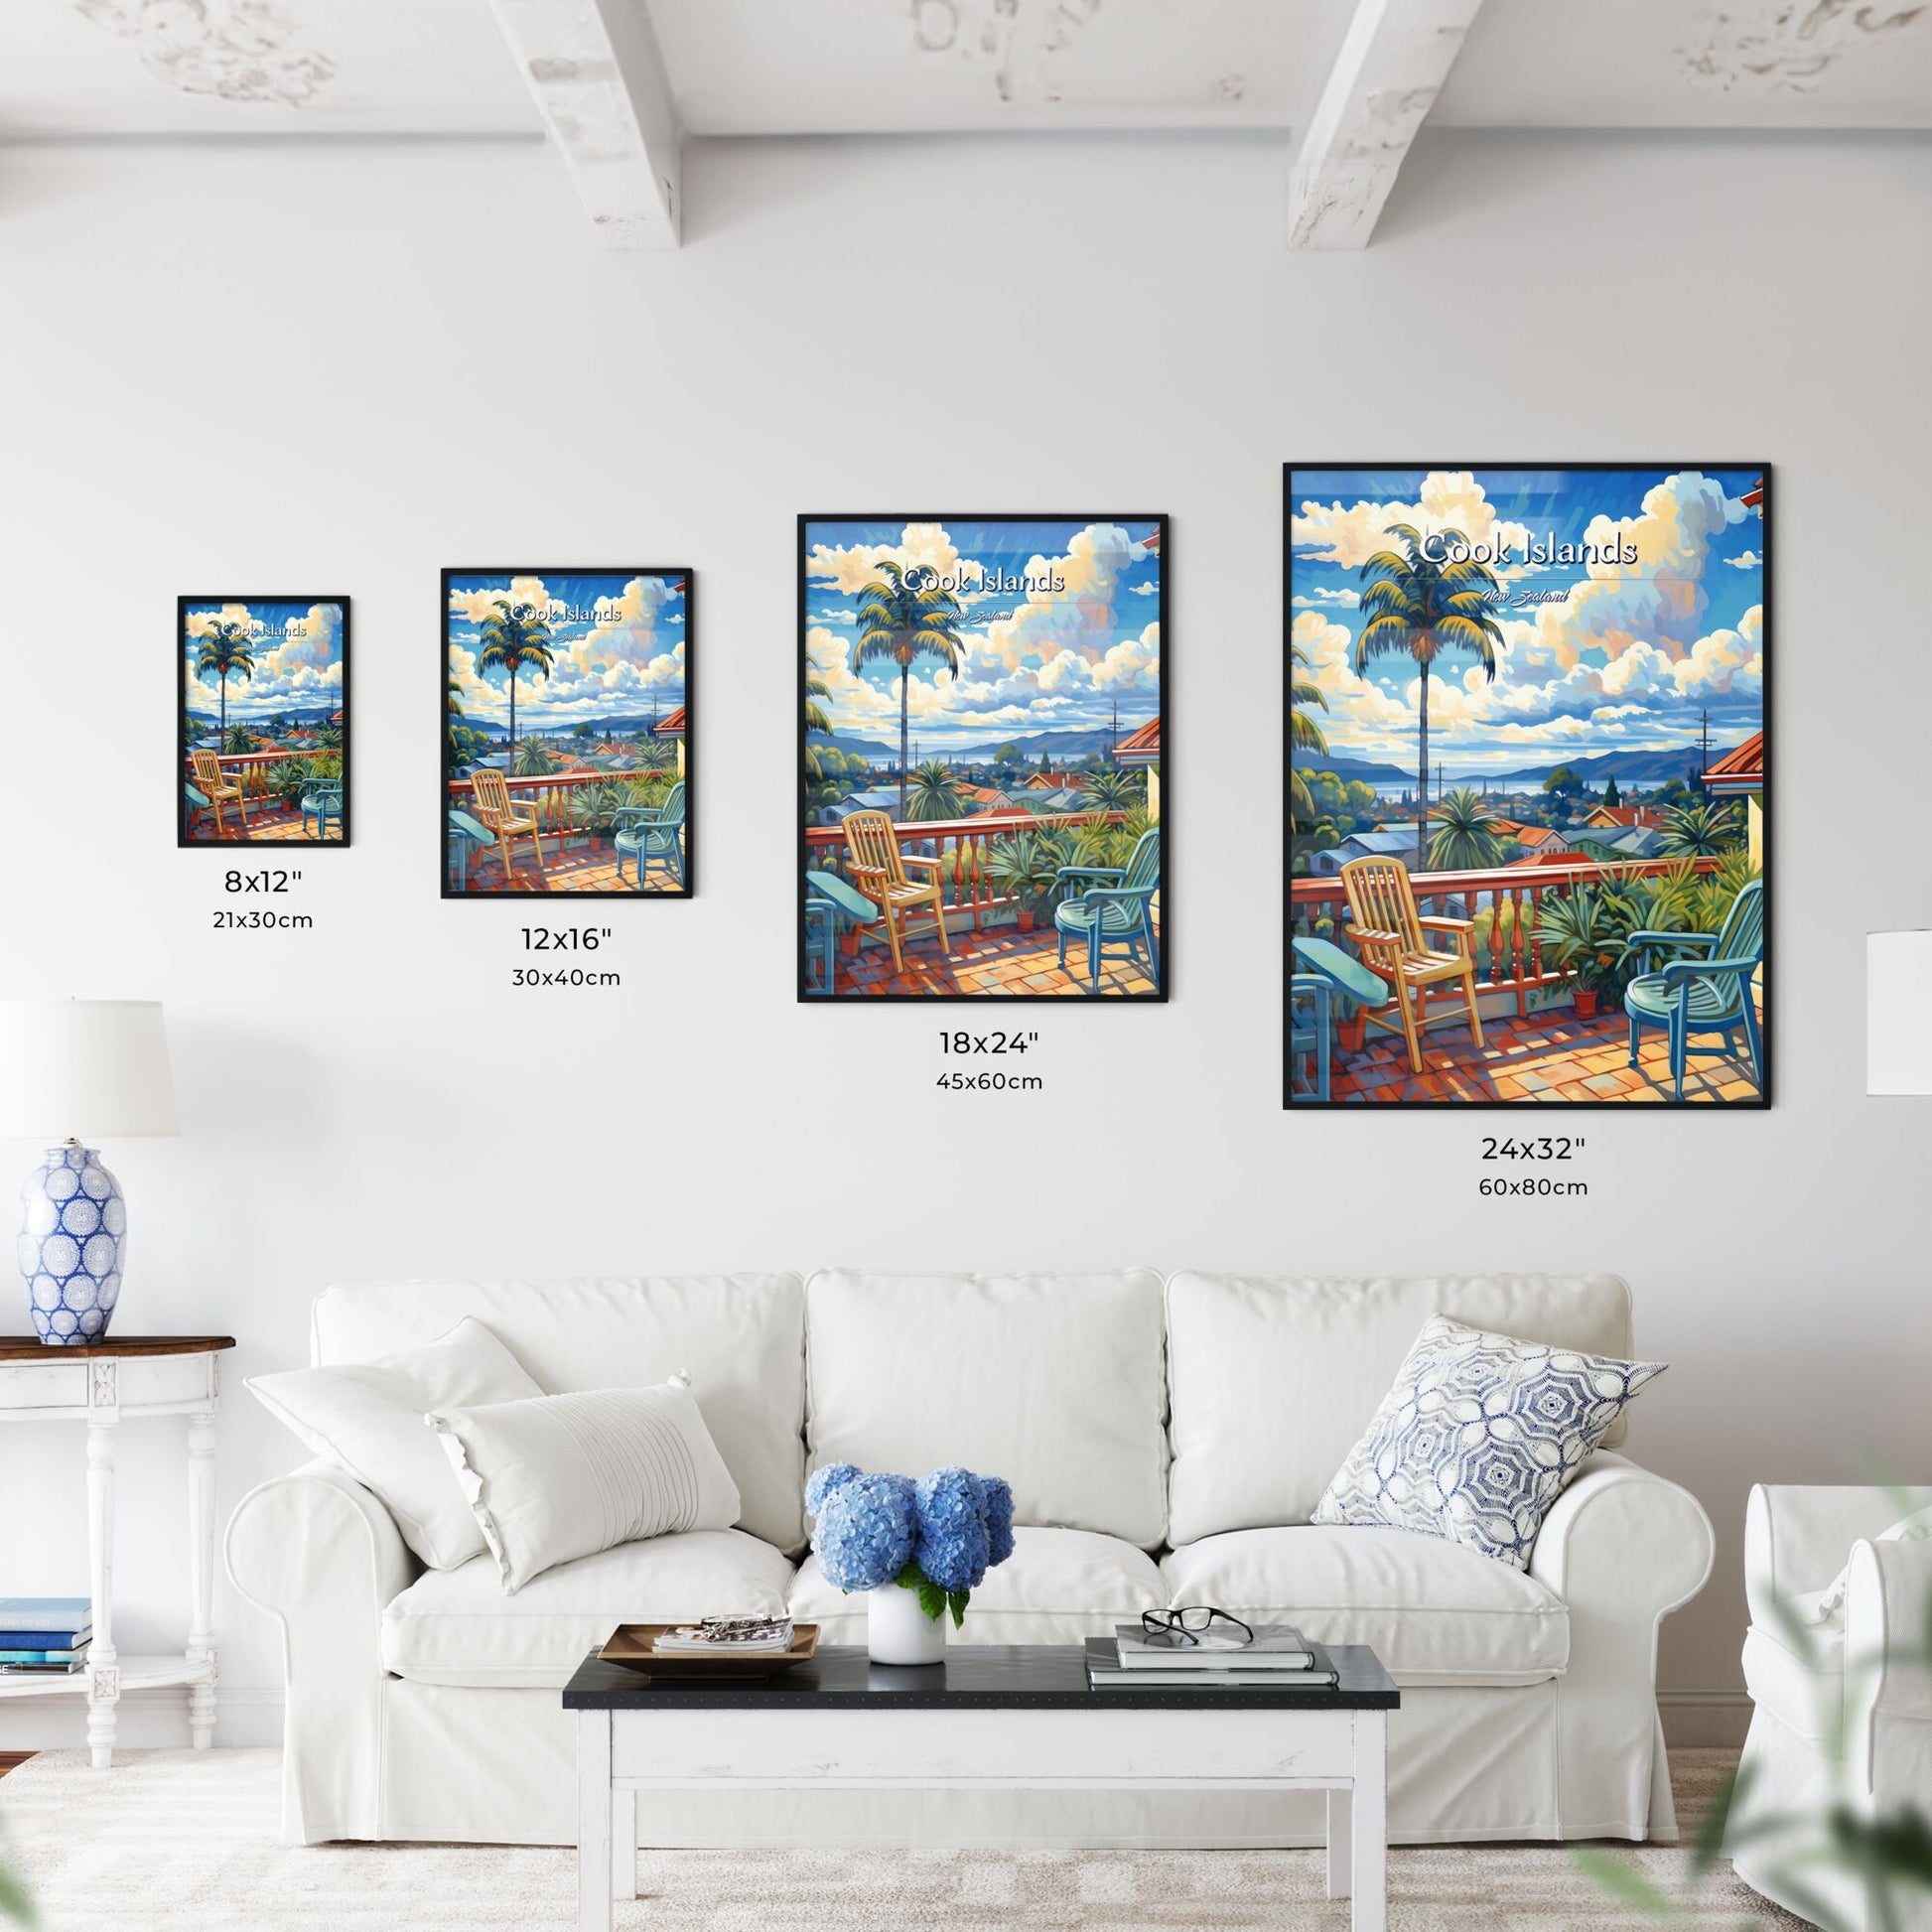 On the roofs of Cook Islands, New Zealand - Art print of a deck with chairs and palm trees Default Title